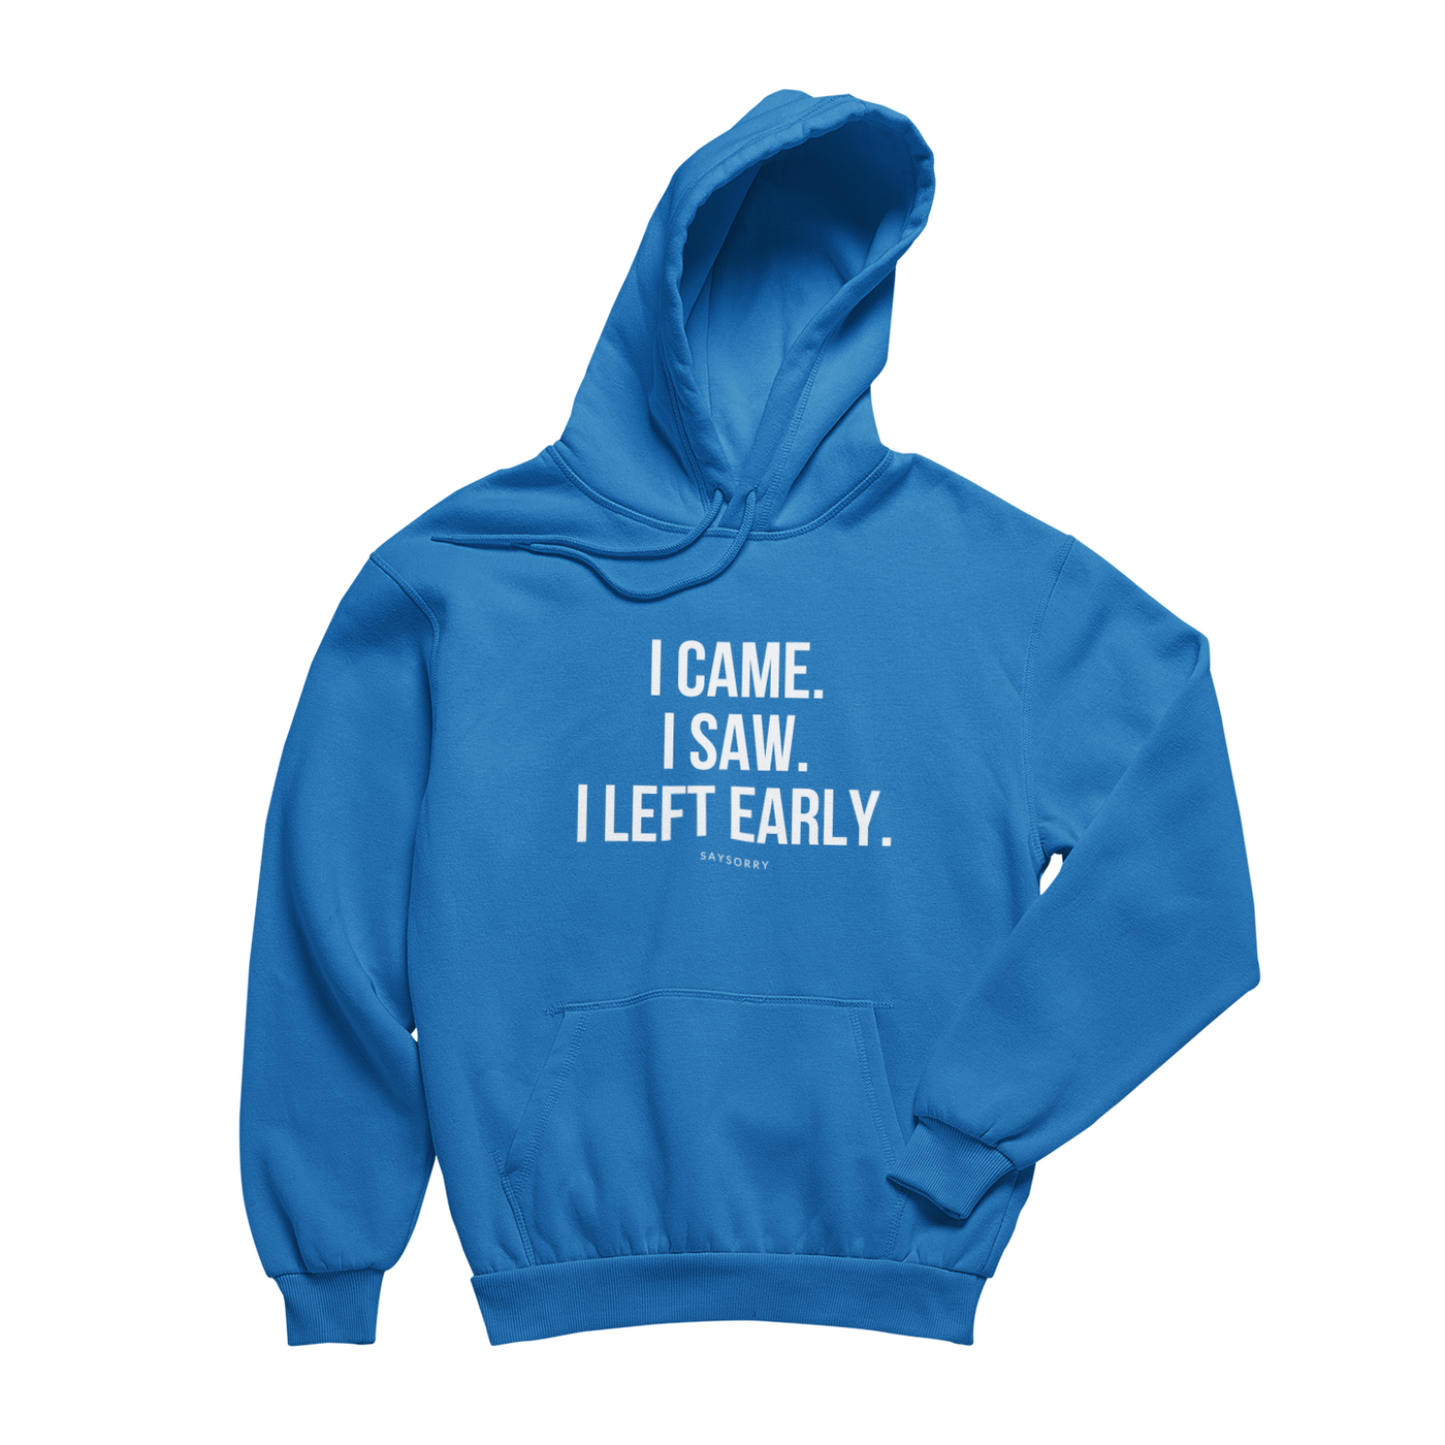 100% Organic unisex Hoodie in vielen Farben »I came. I saw. I left early.«